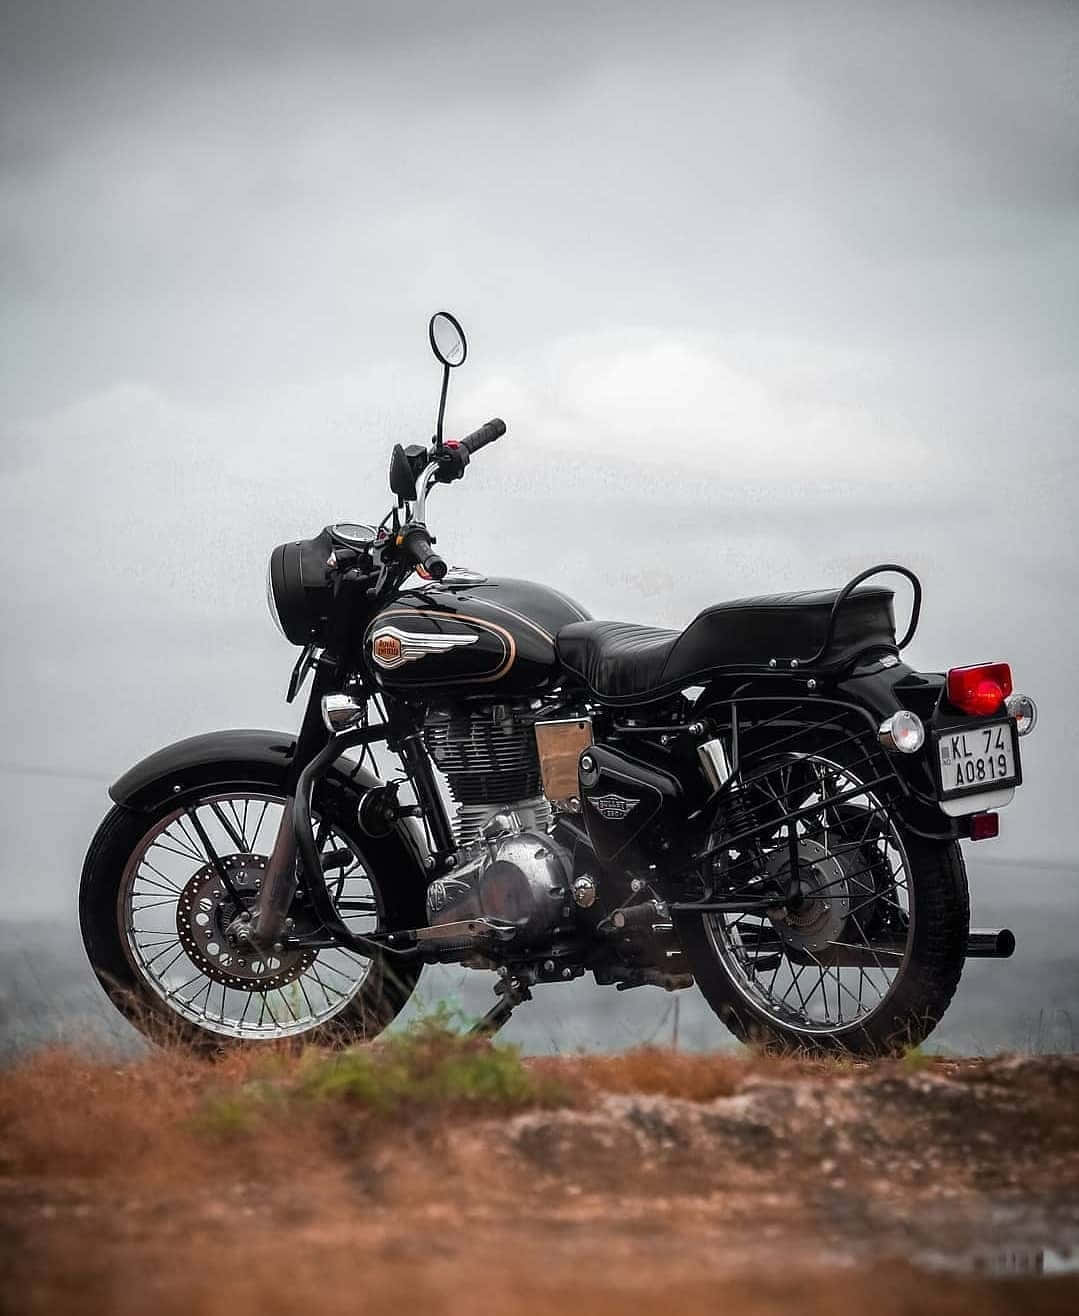 Ride in Style with a Royal Enfield Bullet